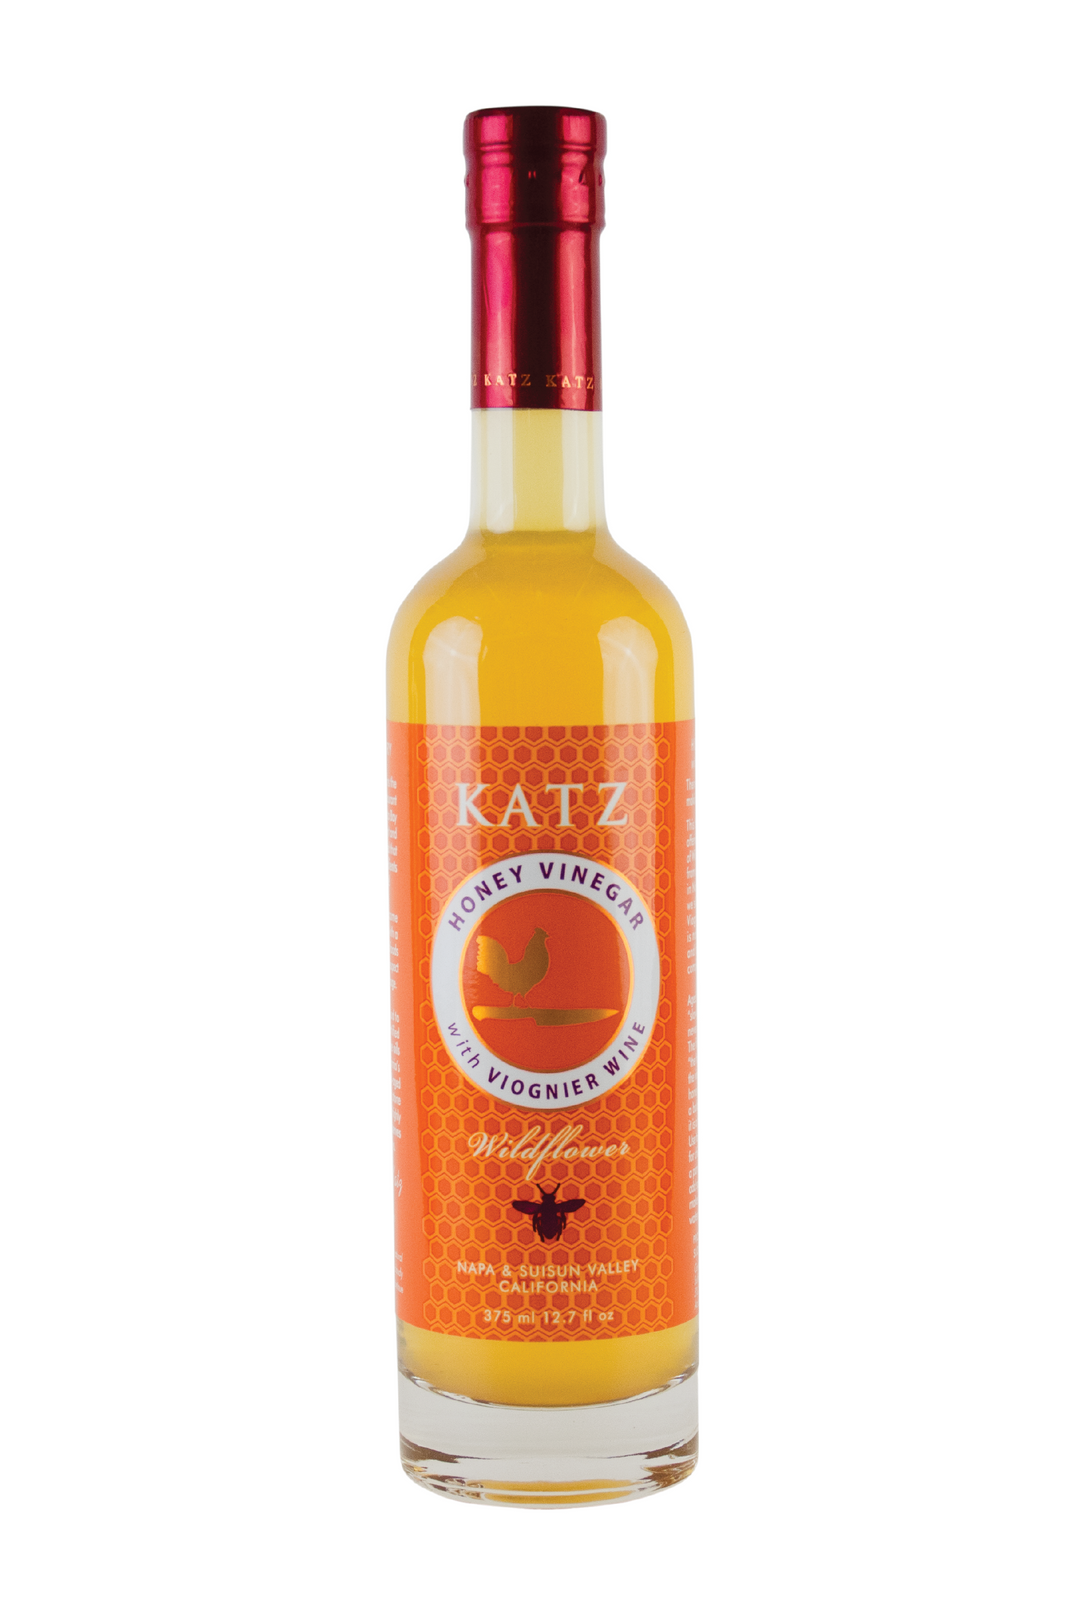 A 375 ml/12.7 oz glass bottle of Katz Honey Vinegar on a white background. Label is orange and white with a pattern of honeycomb. The bottle's logo depicts the shape of a rooster standing on the hilt of a chef's knife in gold with a white, circular border around the picture that says, "Honey Vinegar with Viognier wine." Below the logo is the all black shadow of a bee between the words "Wildflower" and "Napa & Suisun Valley California." Vinegar is a bright, honey yellow color.